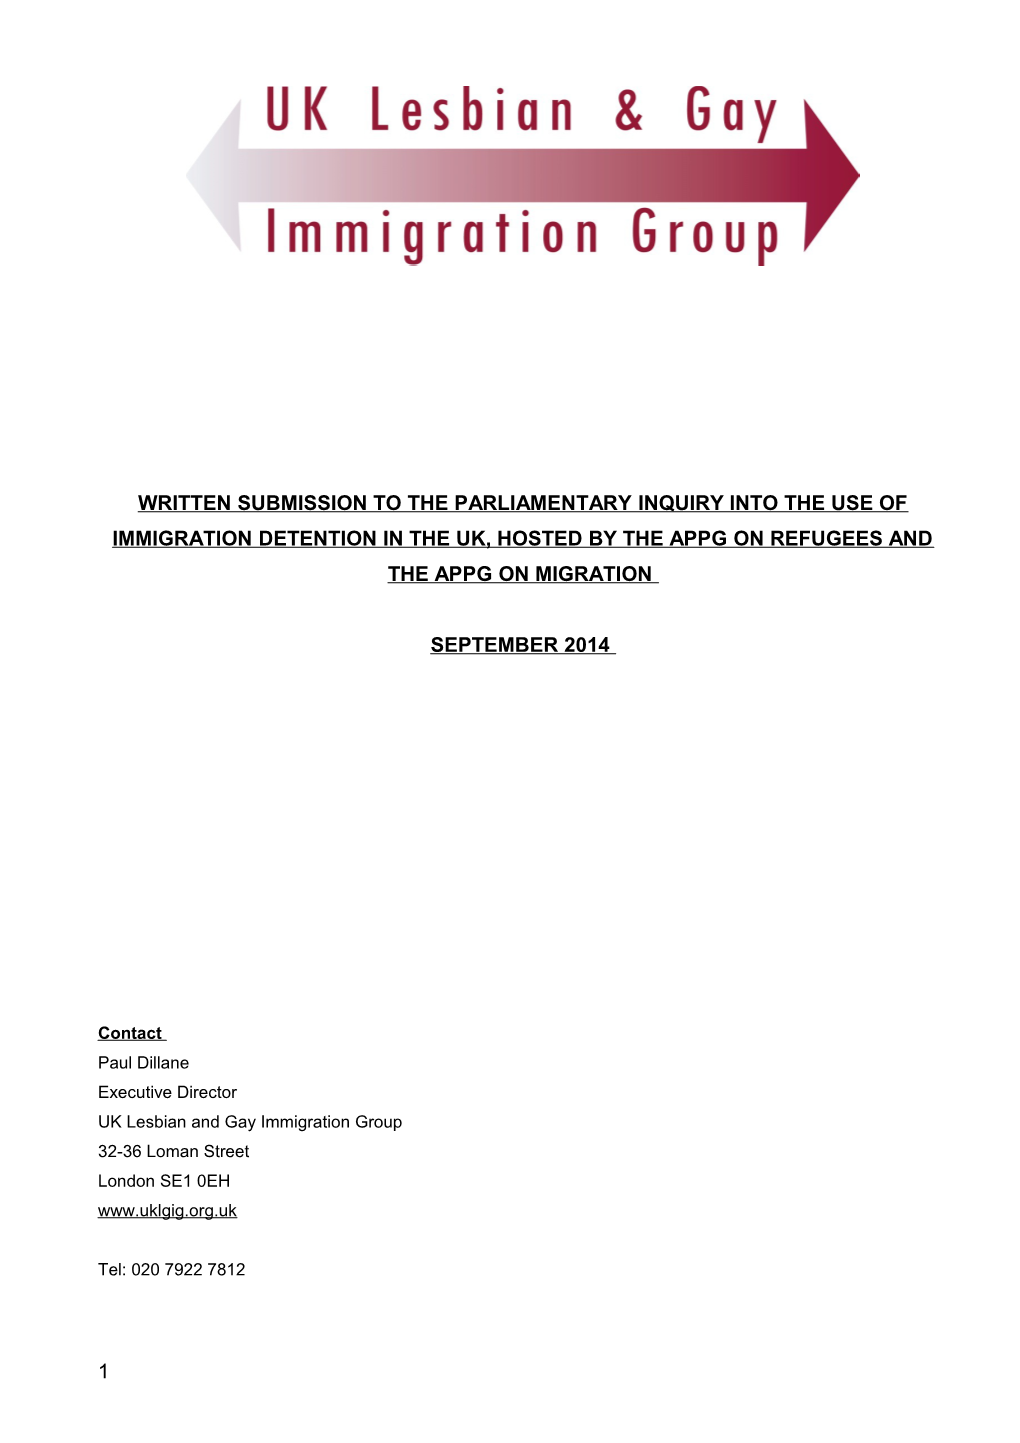 Written Submission to the Parliamentary Inquiry Into the Use of Immigration Detention